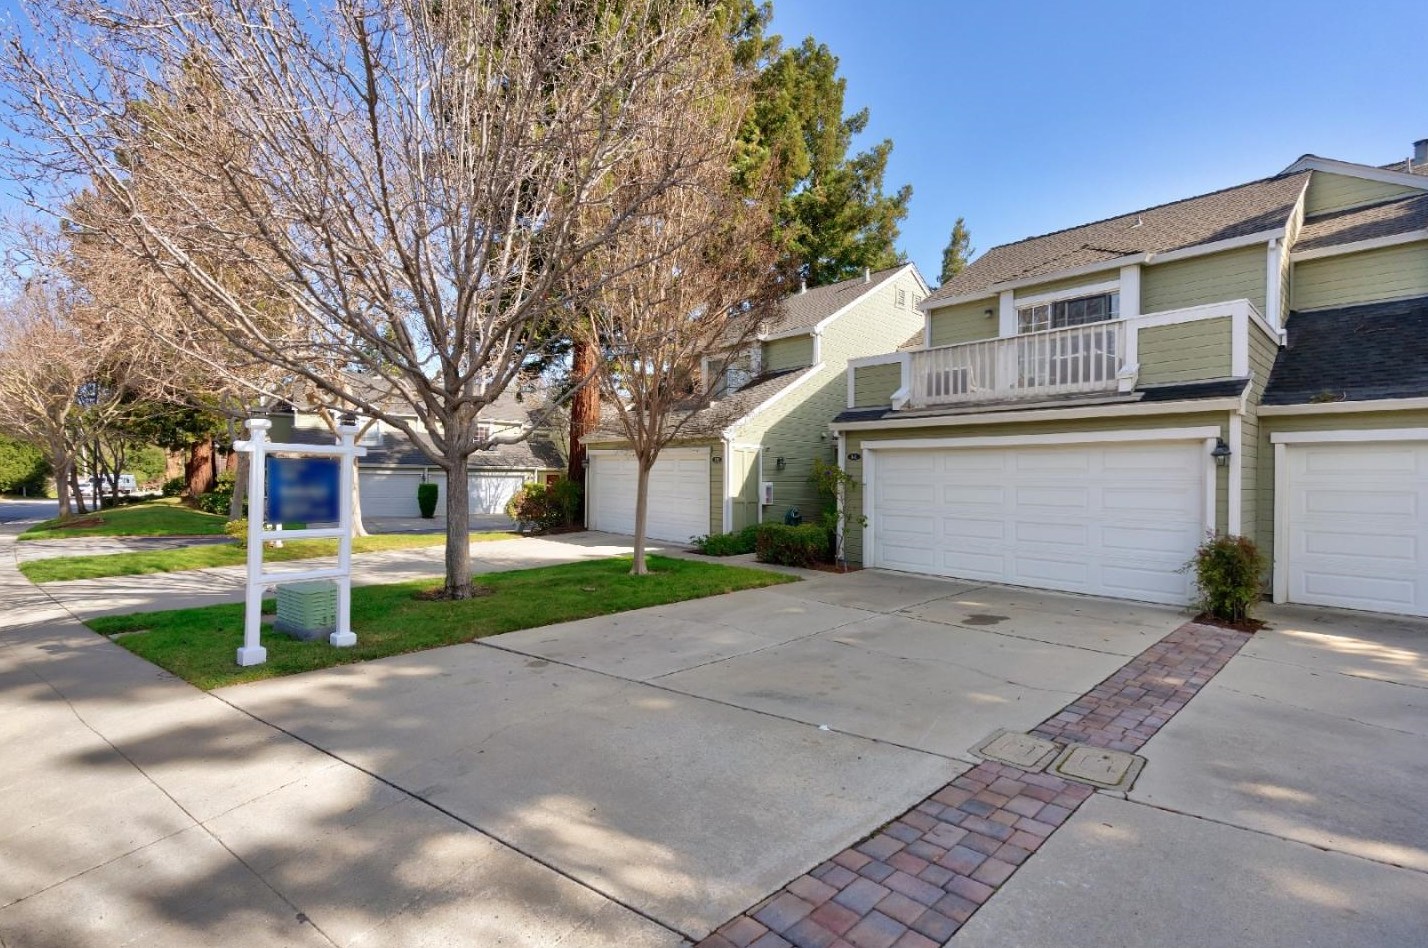 141 Easy St, Mountain View, CA 94043